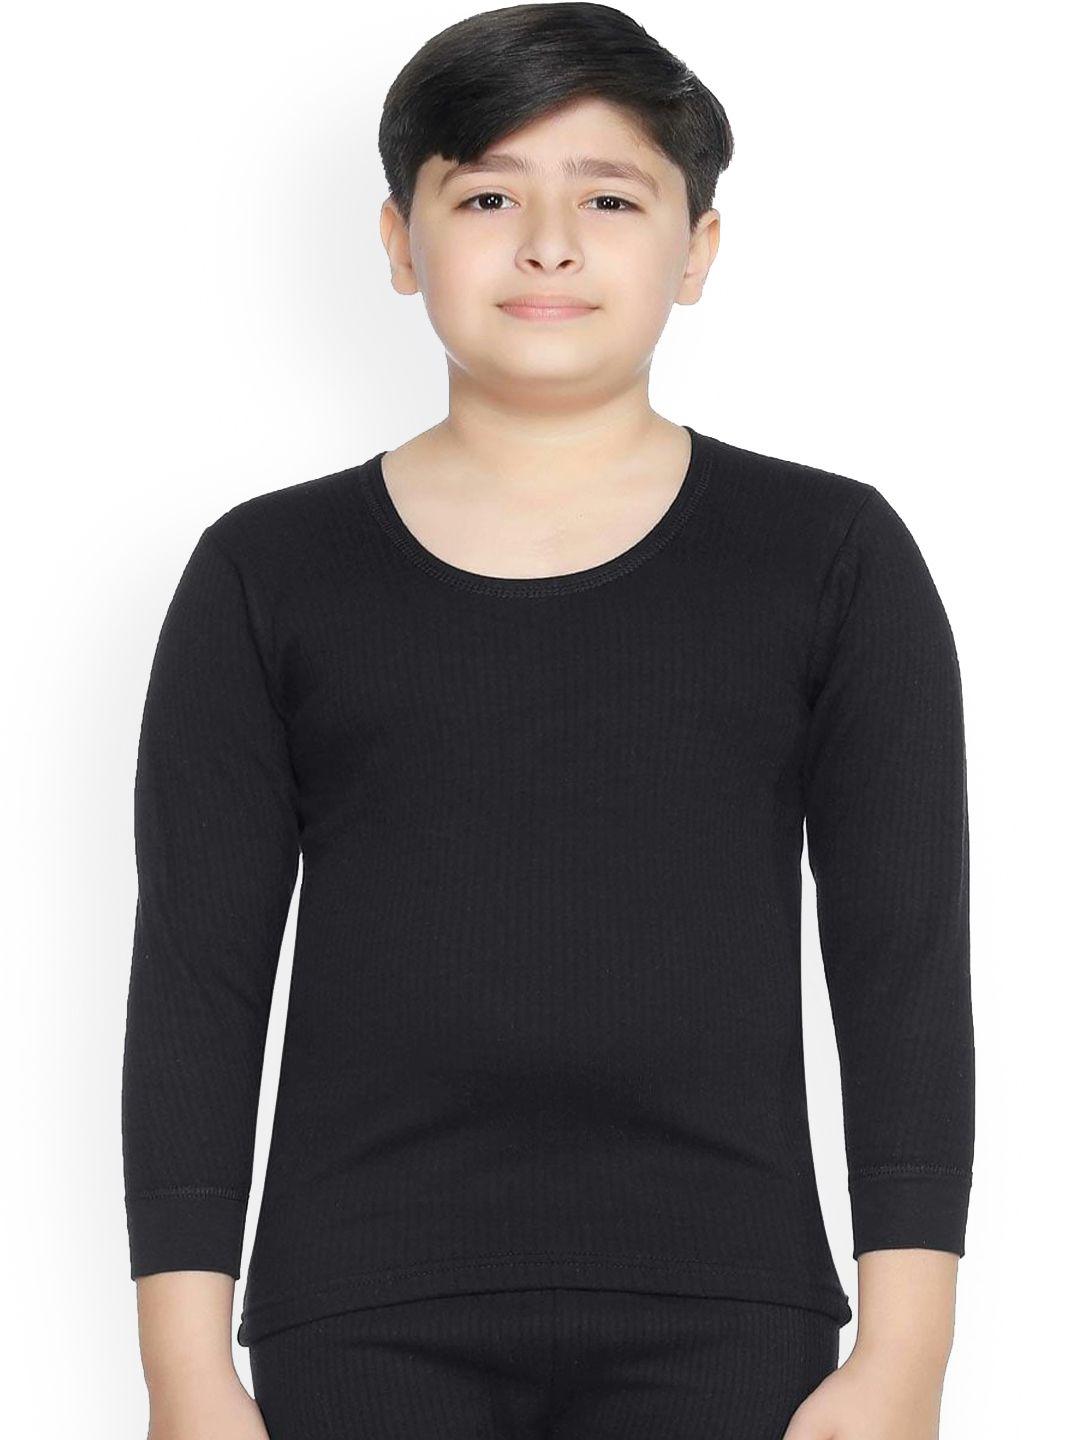 bodycare-kids-boys-black-solid-cotton-thermal-tops